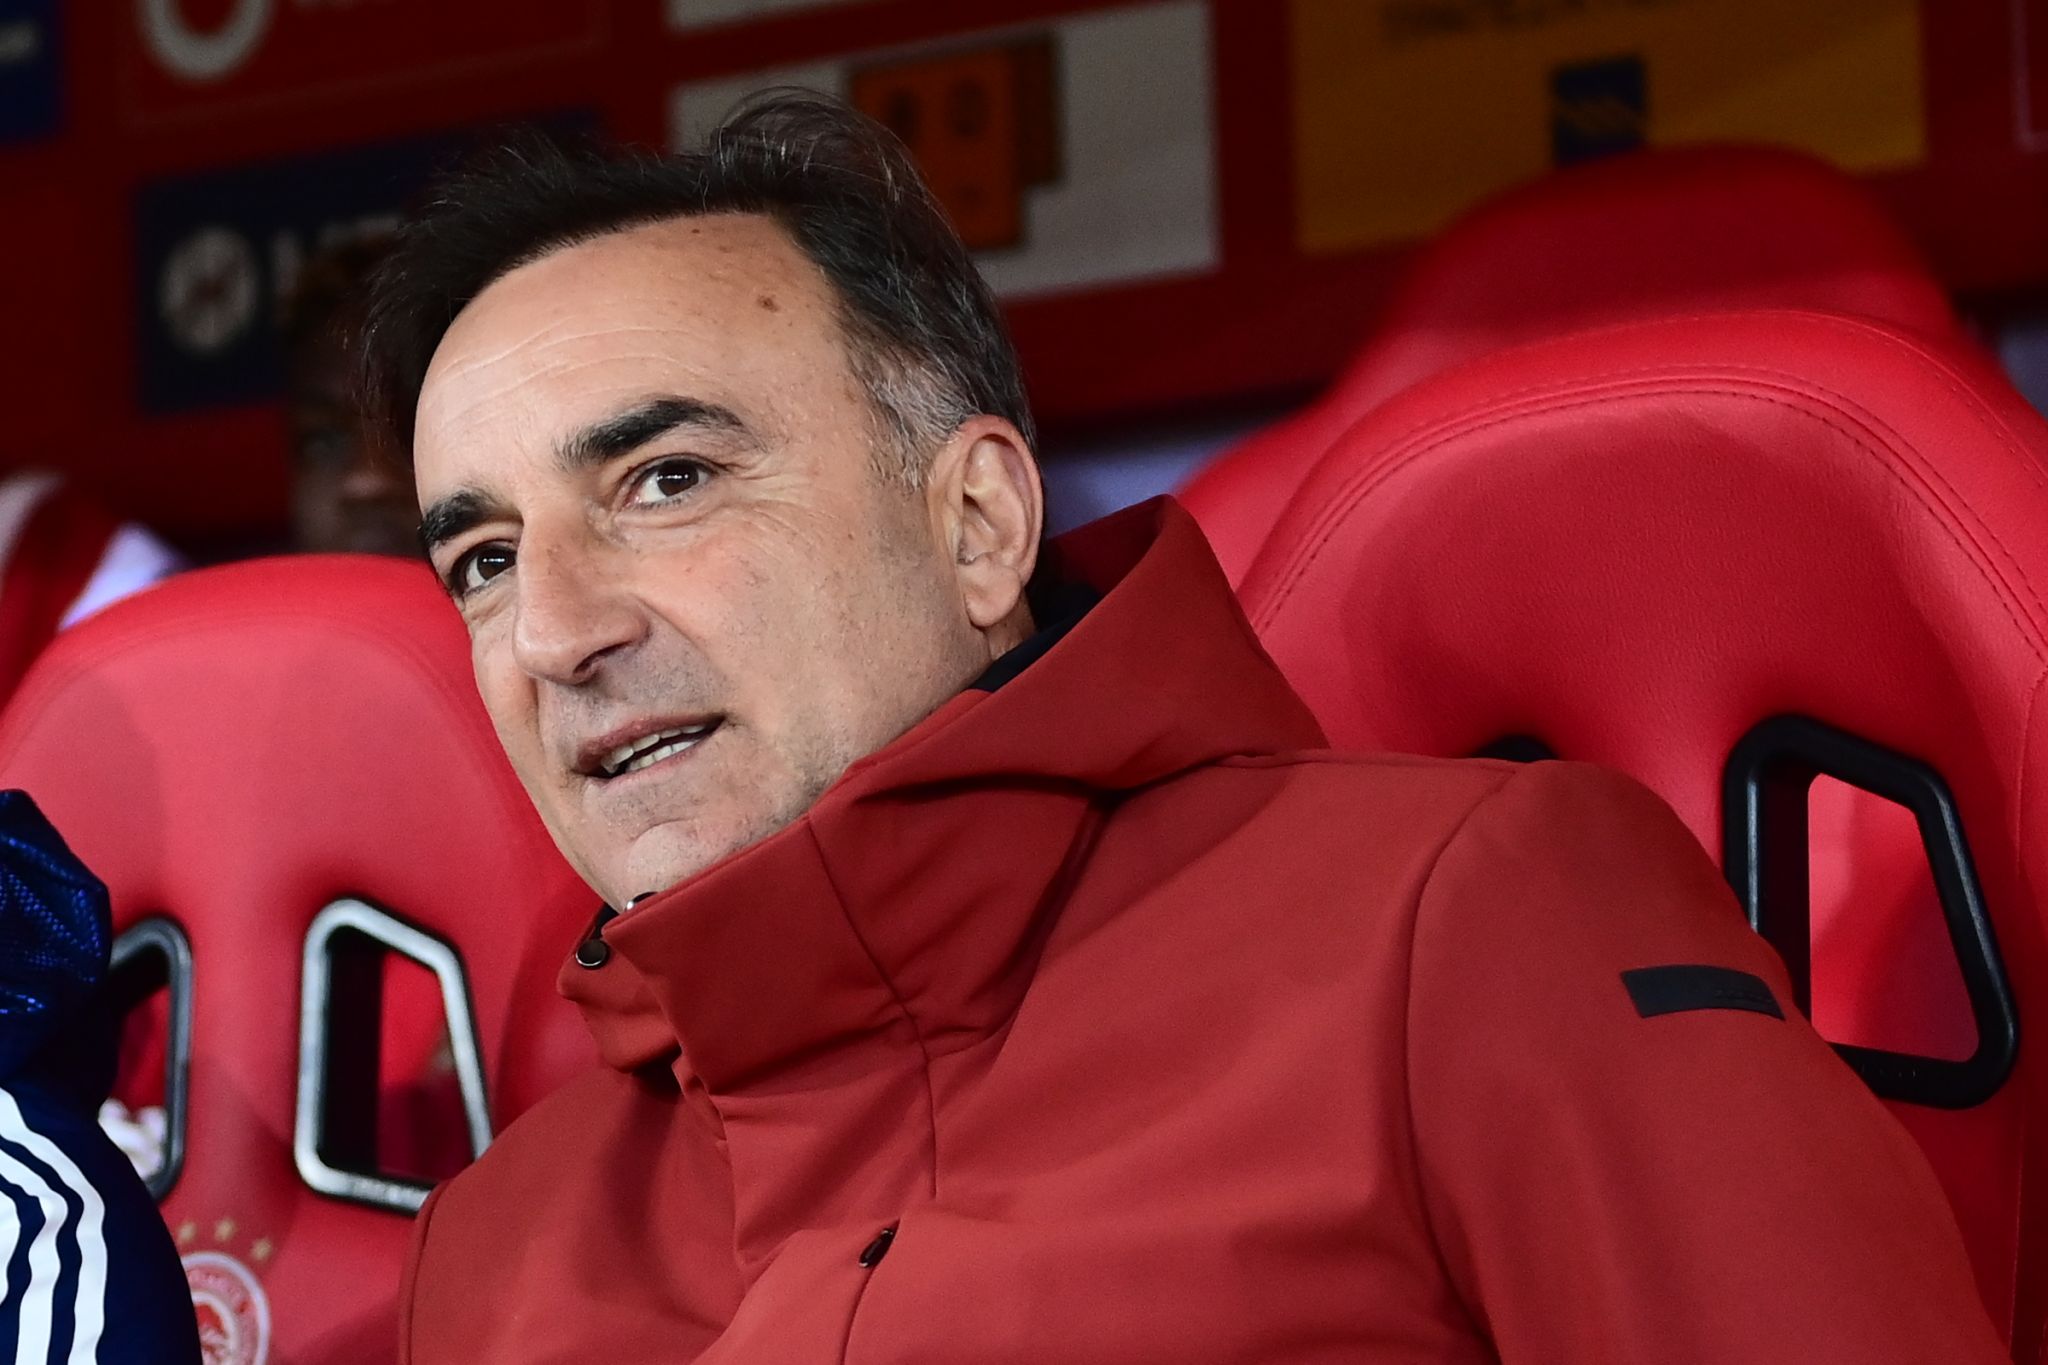 Carlos Carvalhal: “Both phases are clear”